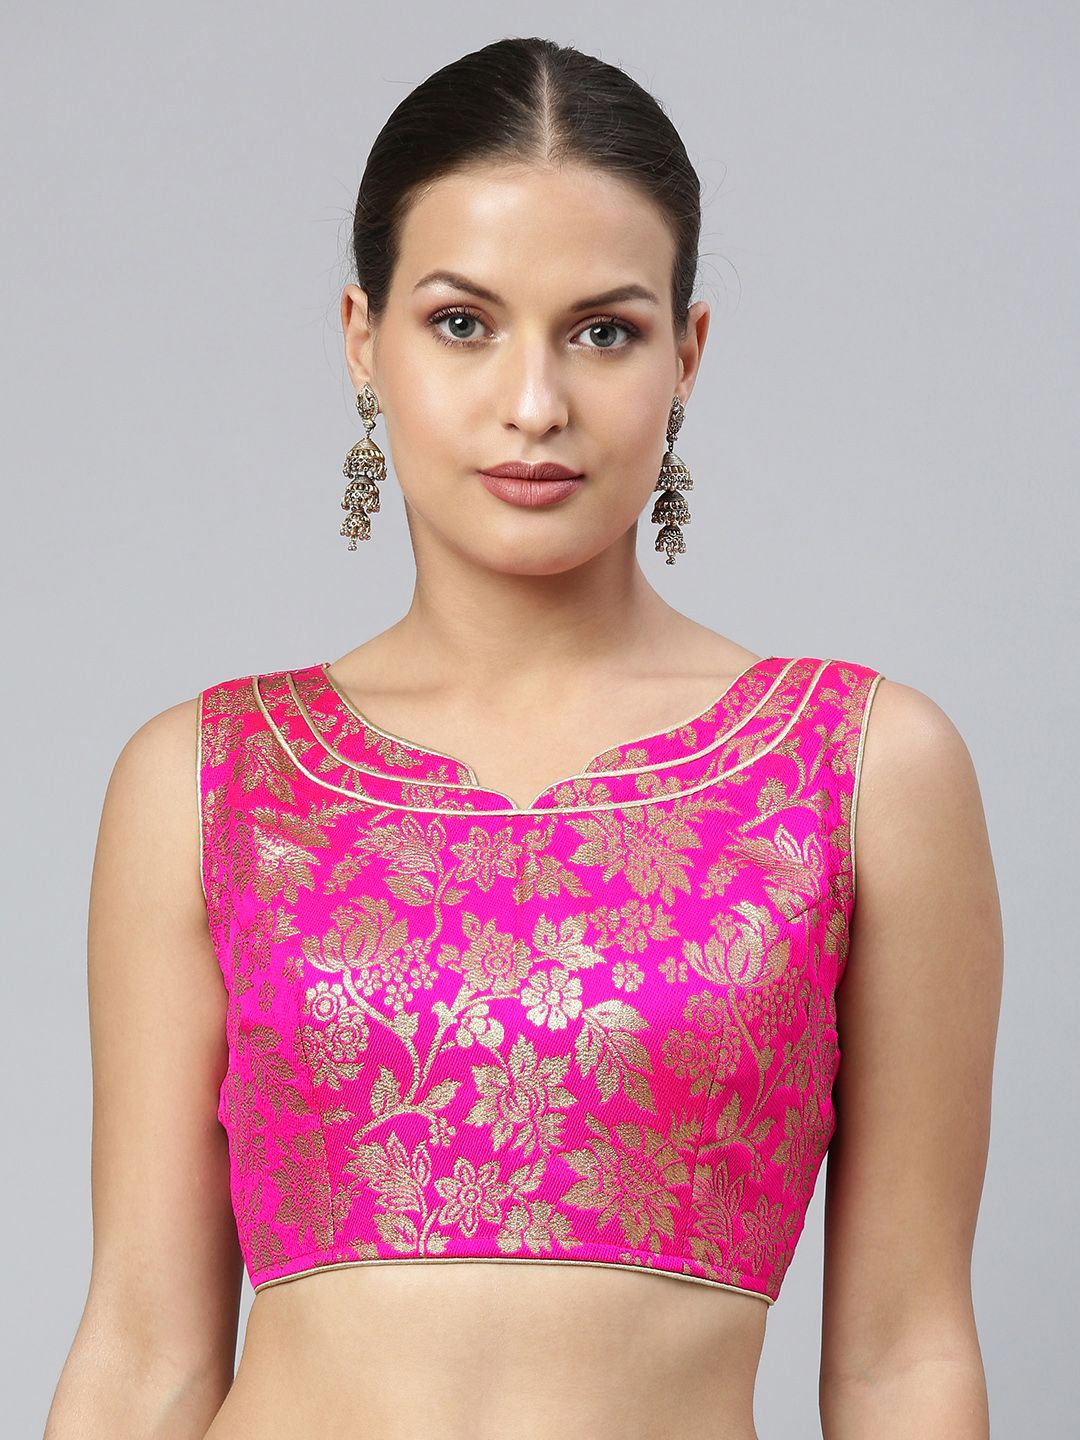 flaher Women Pink & Gold Ethnic Motifs Jacquard Woven Design Saree Blouse with Tie-Ups Price in India